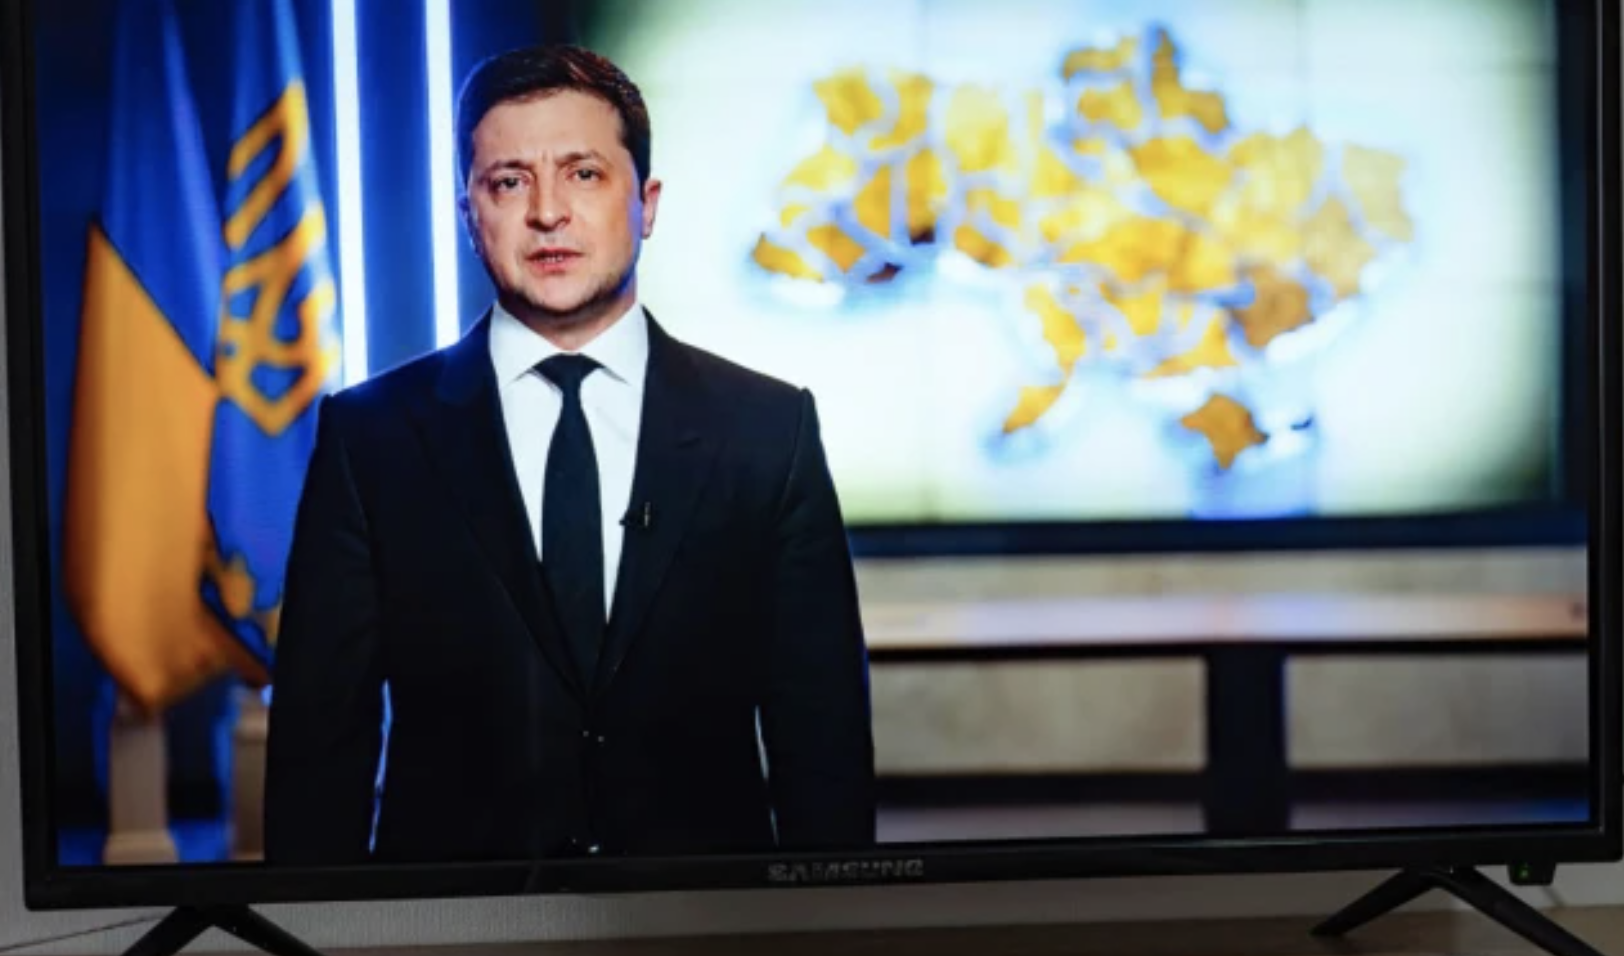 Featured image for “THE ROLE OF HIS LIFE  FROM COMEDIAN TO CHURCHILL; ZELENSKY IN THE SPOTLIGHT”